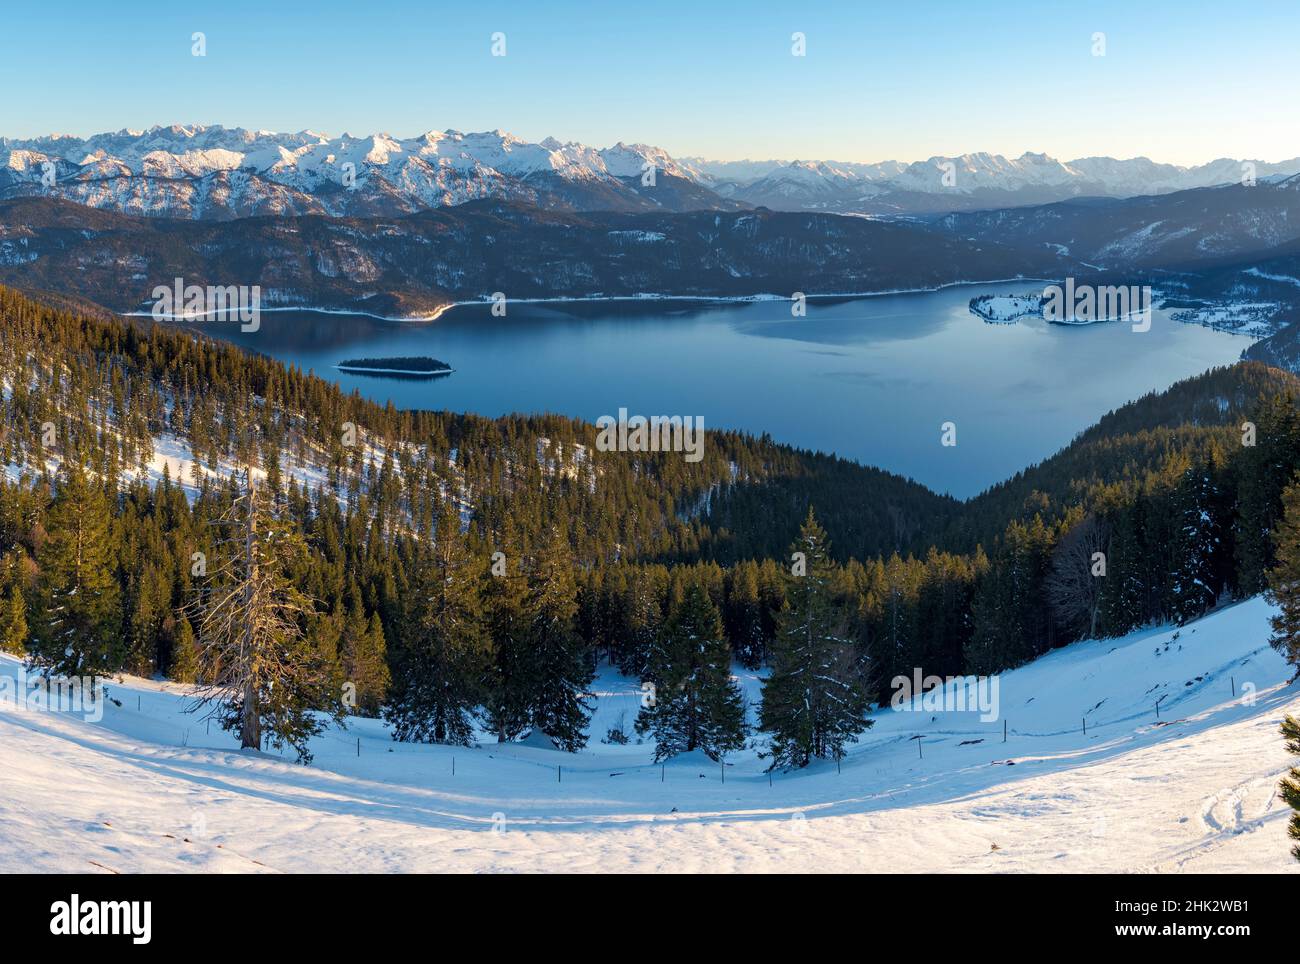 View towards lake Walchensee and the Karwendel mountain range. View from Mt. Jochberg near lake Walchensee during winter in the Bavarian Alps. Germany Stock Photo